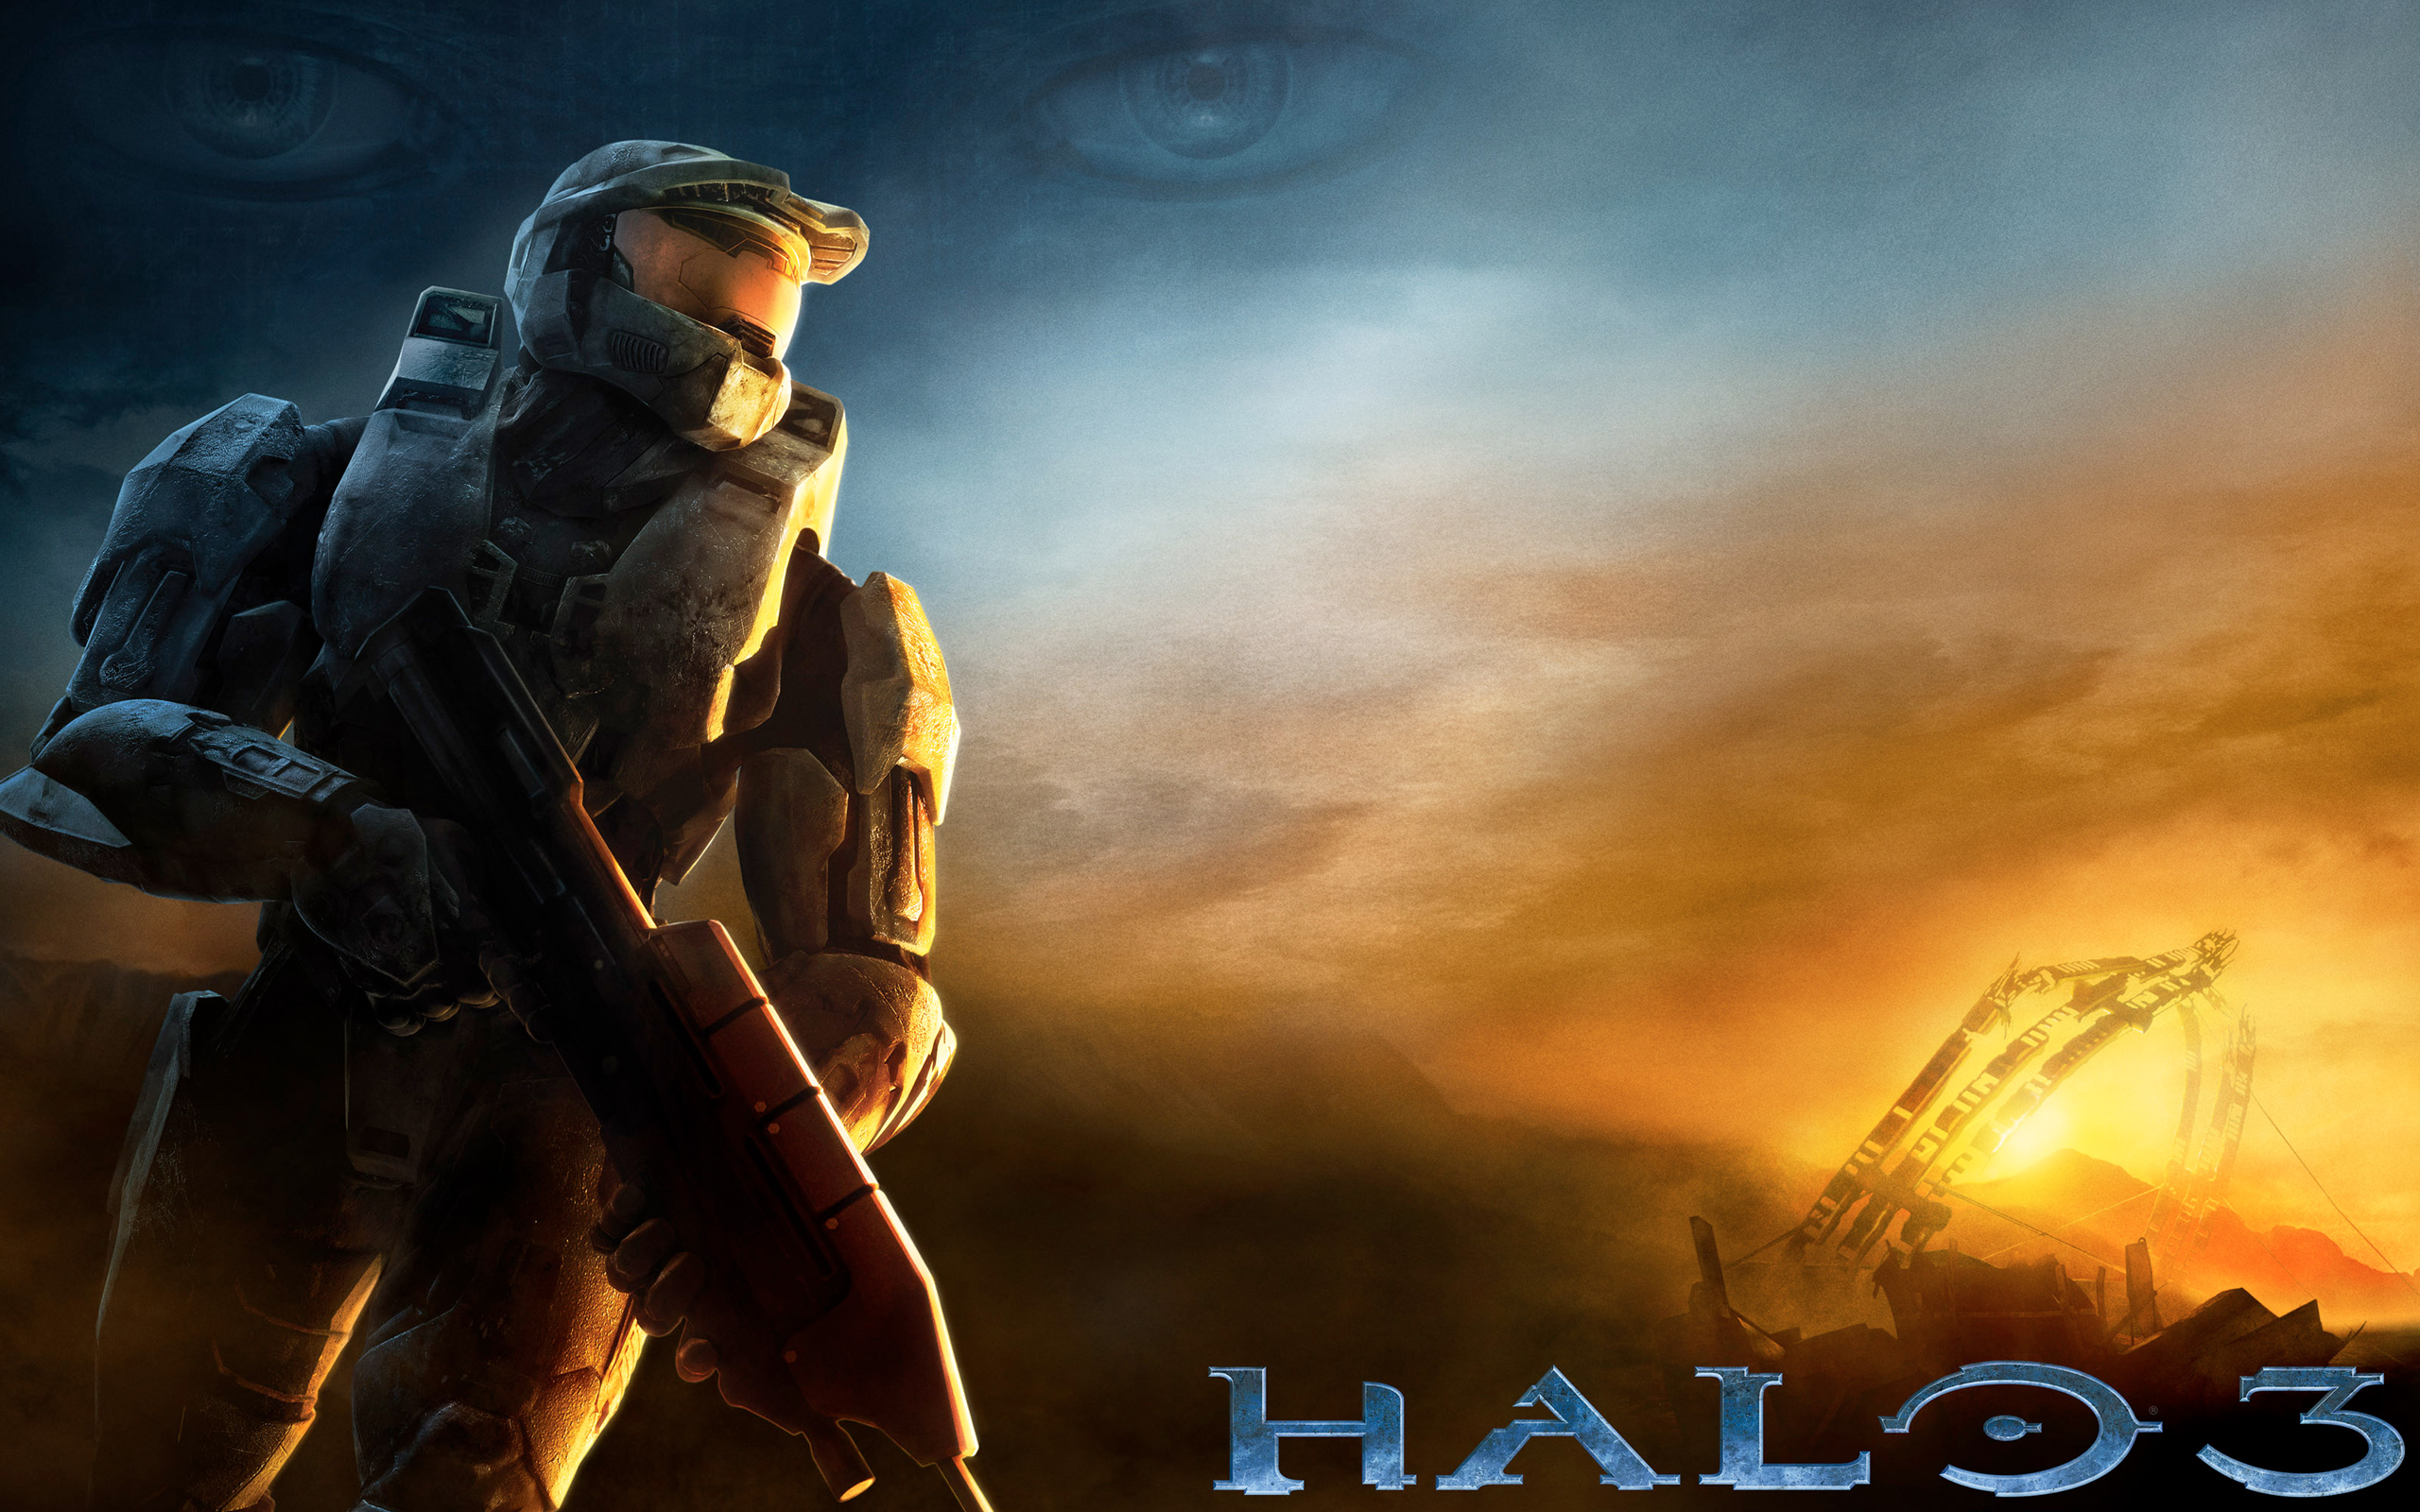 Halo 3 Game - Wallpaper, High Definition, High Quality ...